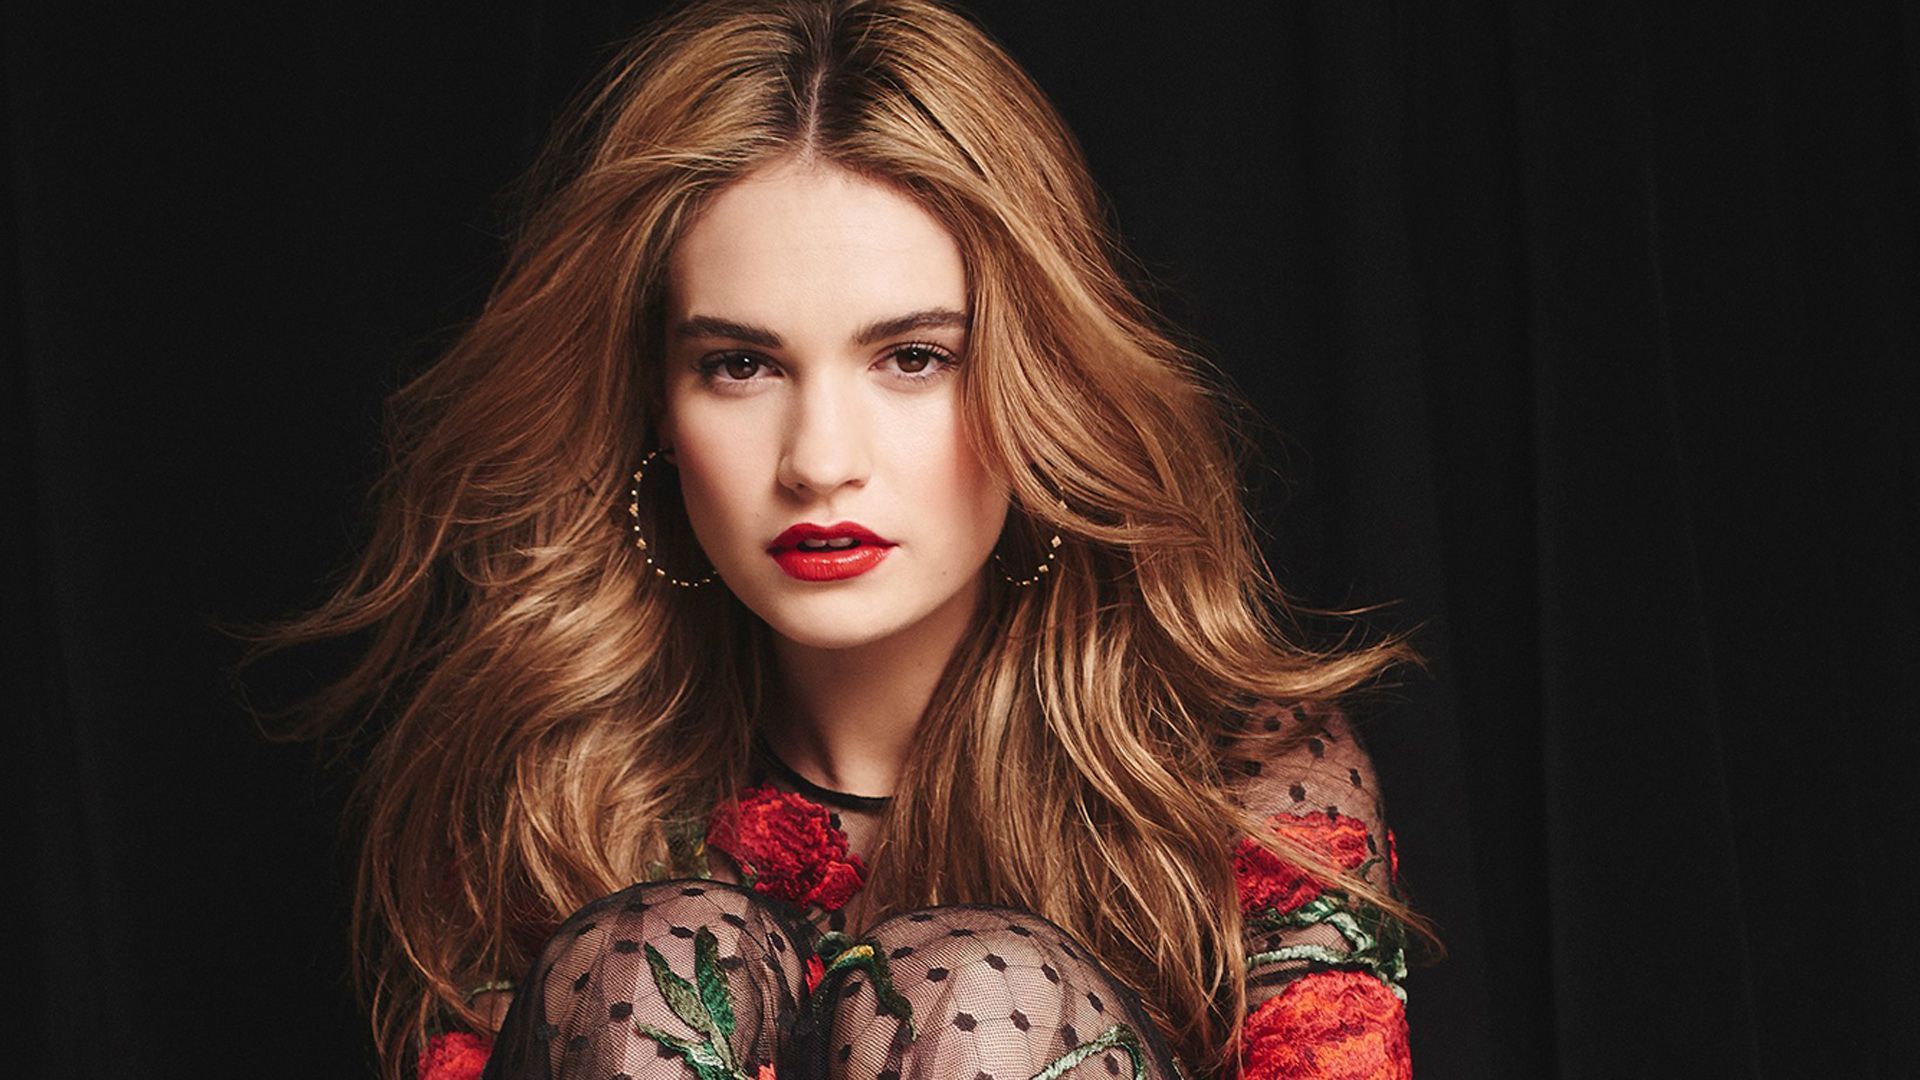 Lily James Photoshoot 2017 Wallpapers